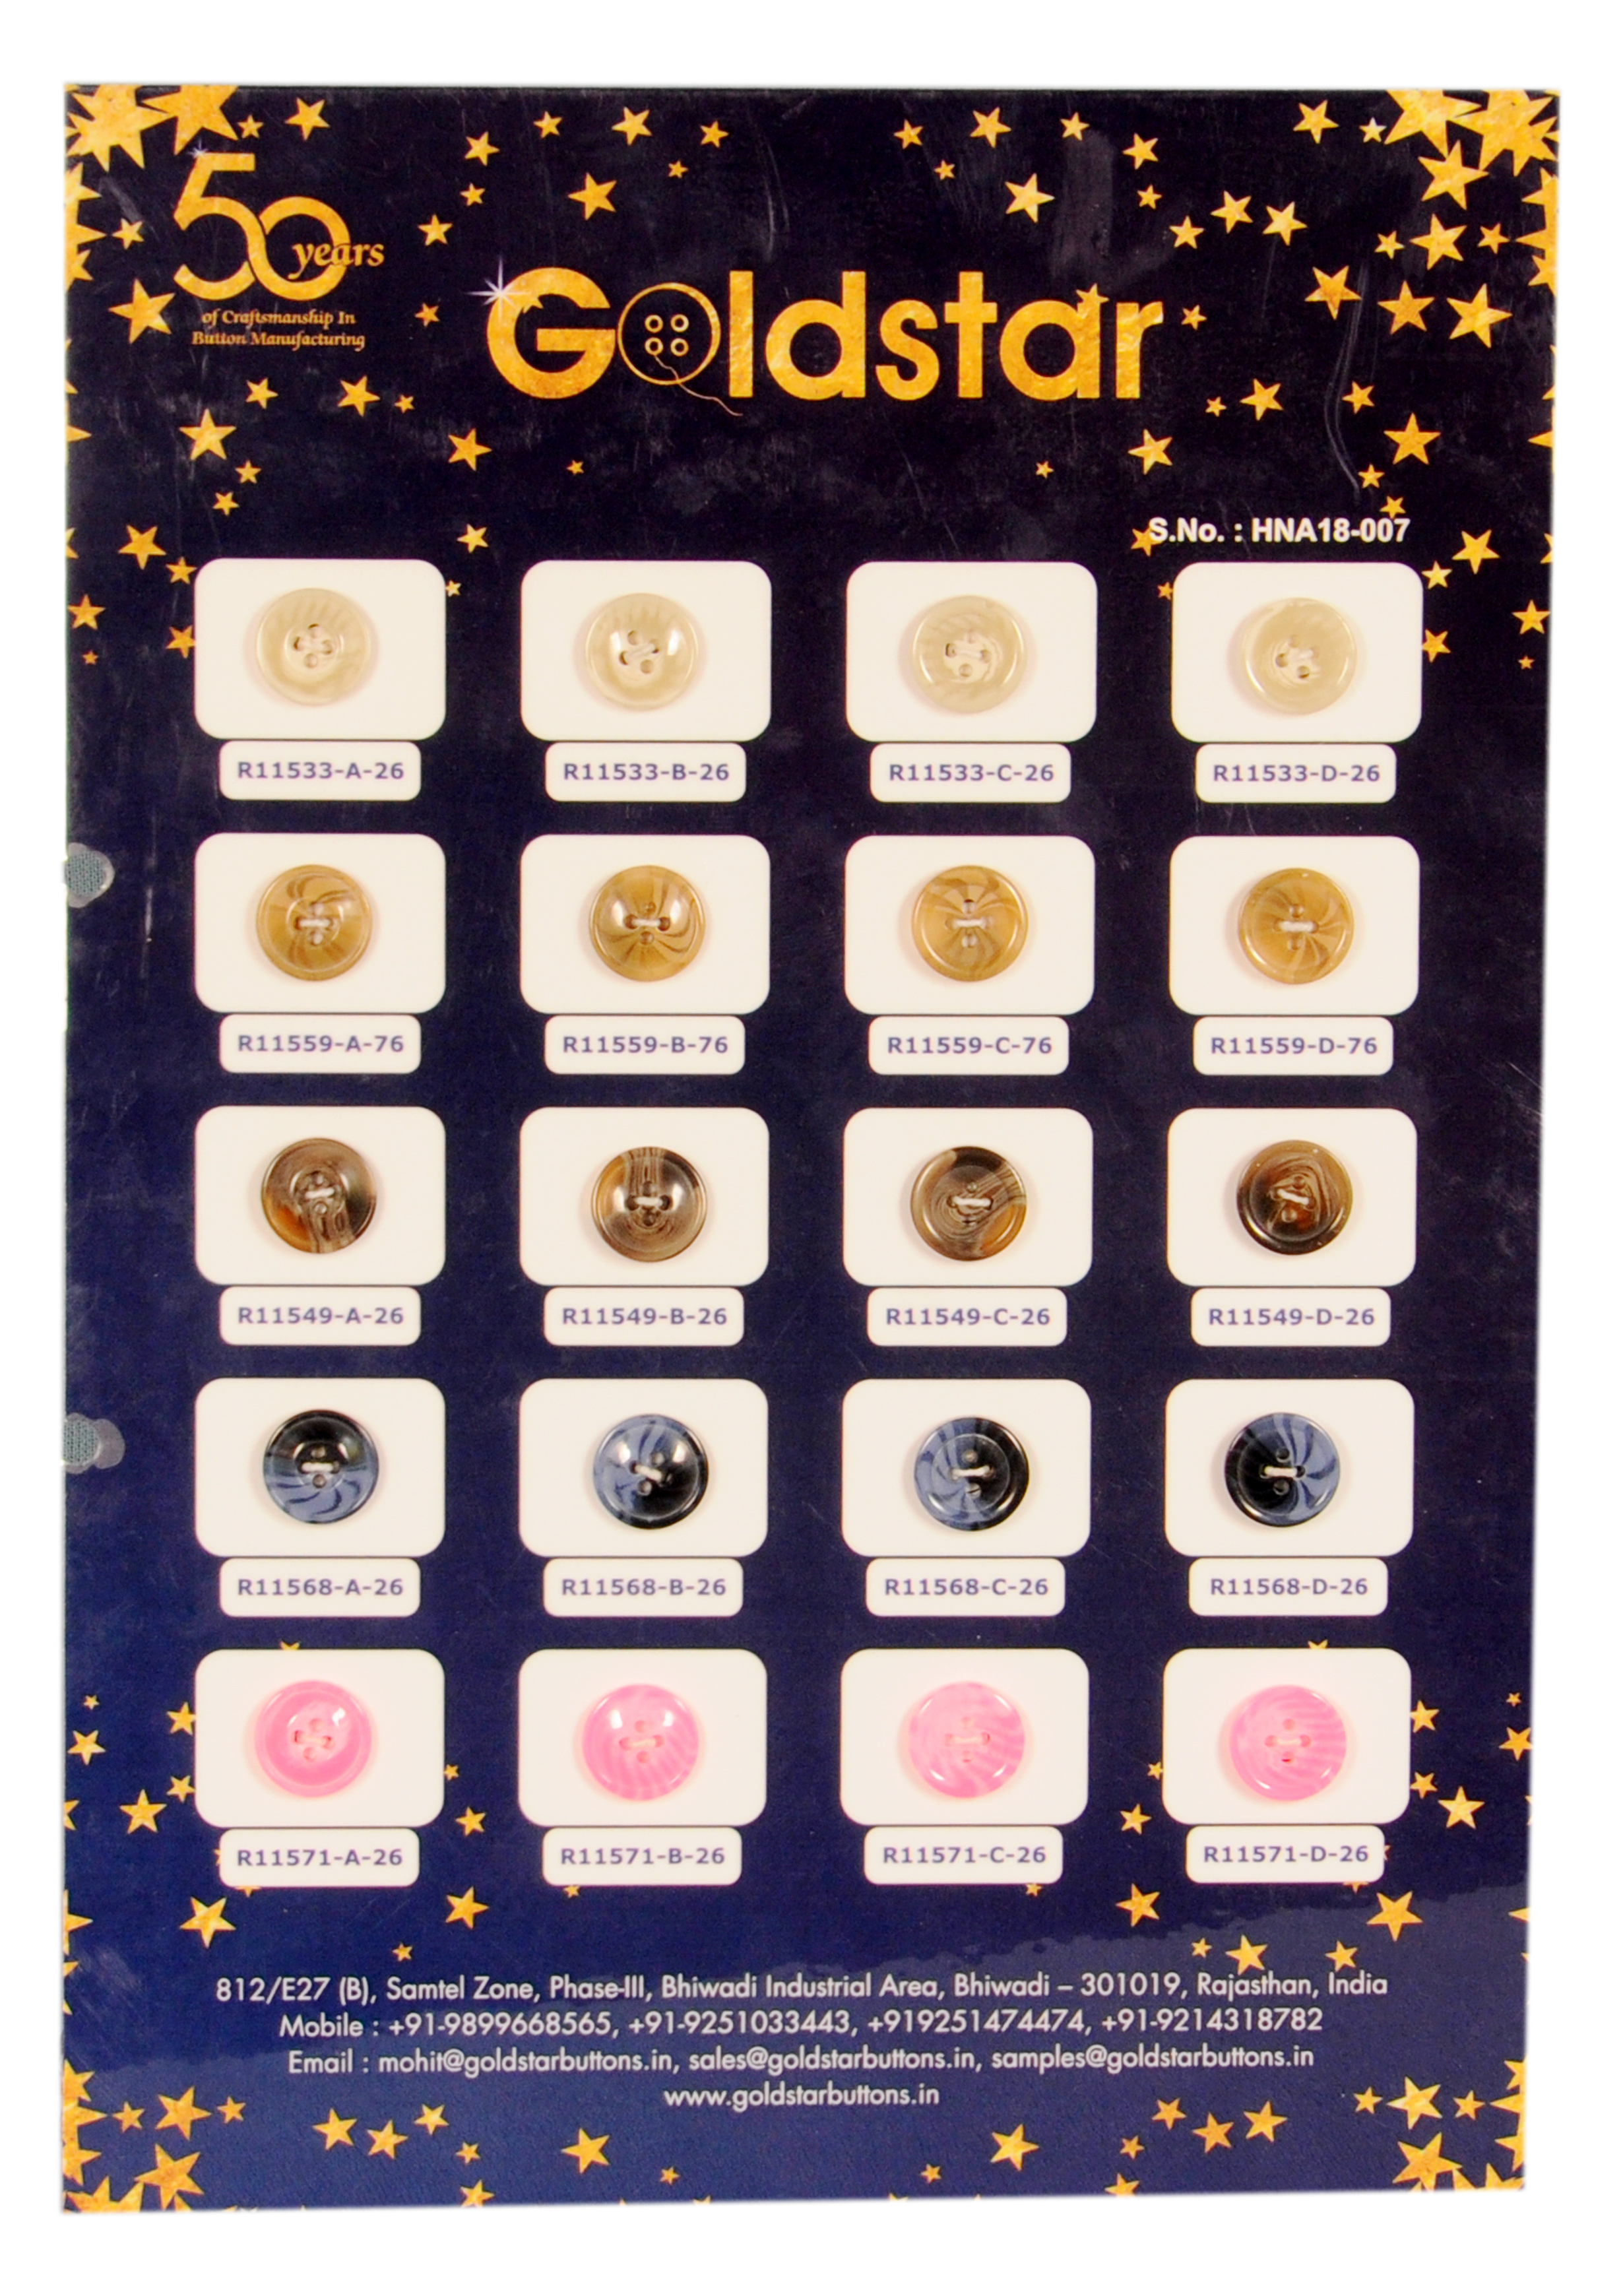 Polyester buttons